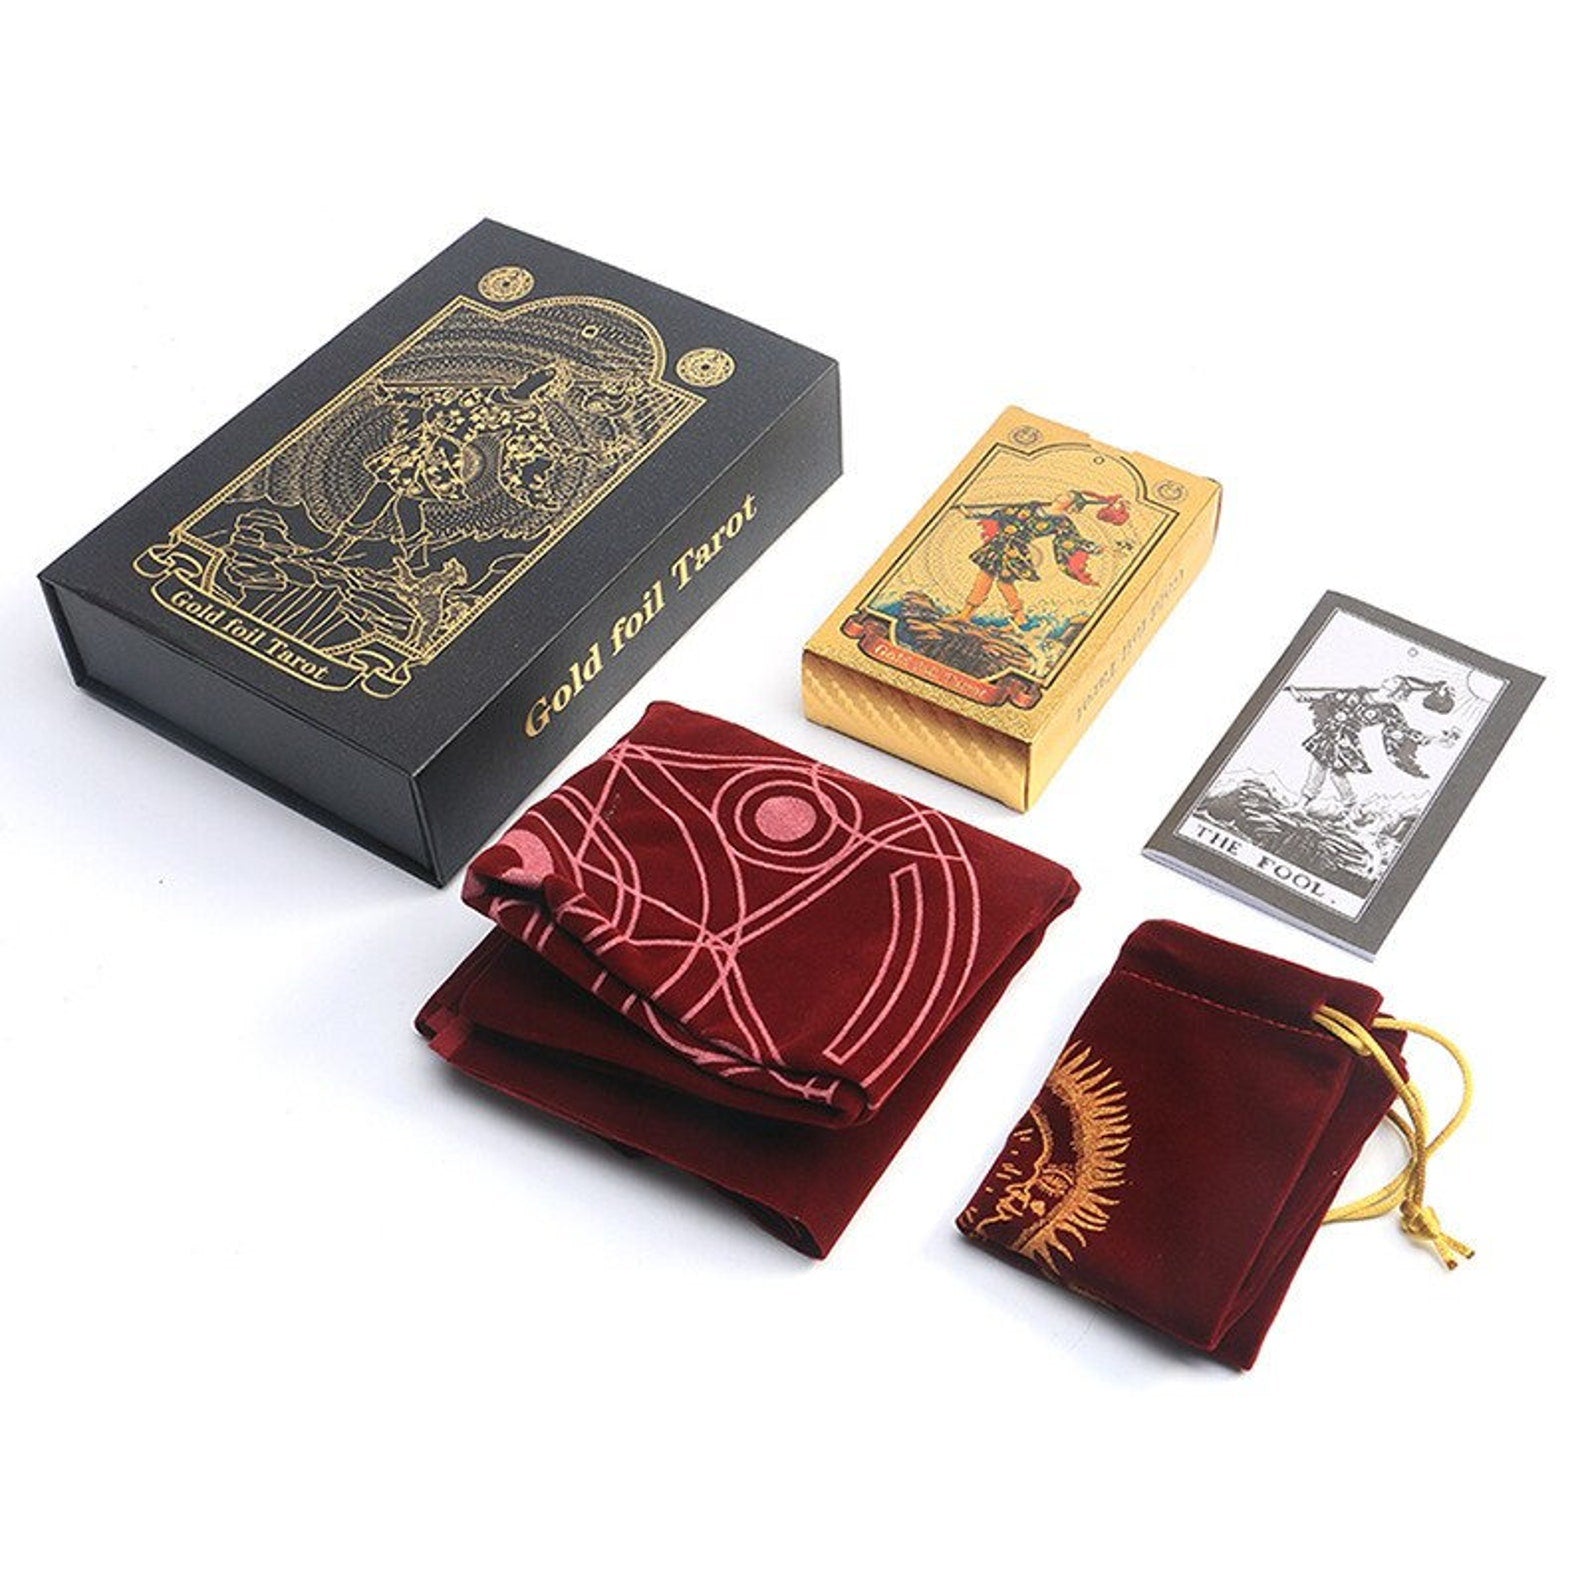 Gold Foil Rider-Waite Tarot Deck Gift Box With Guidebook For Beginners | Premium Cards